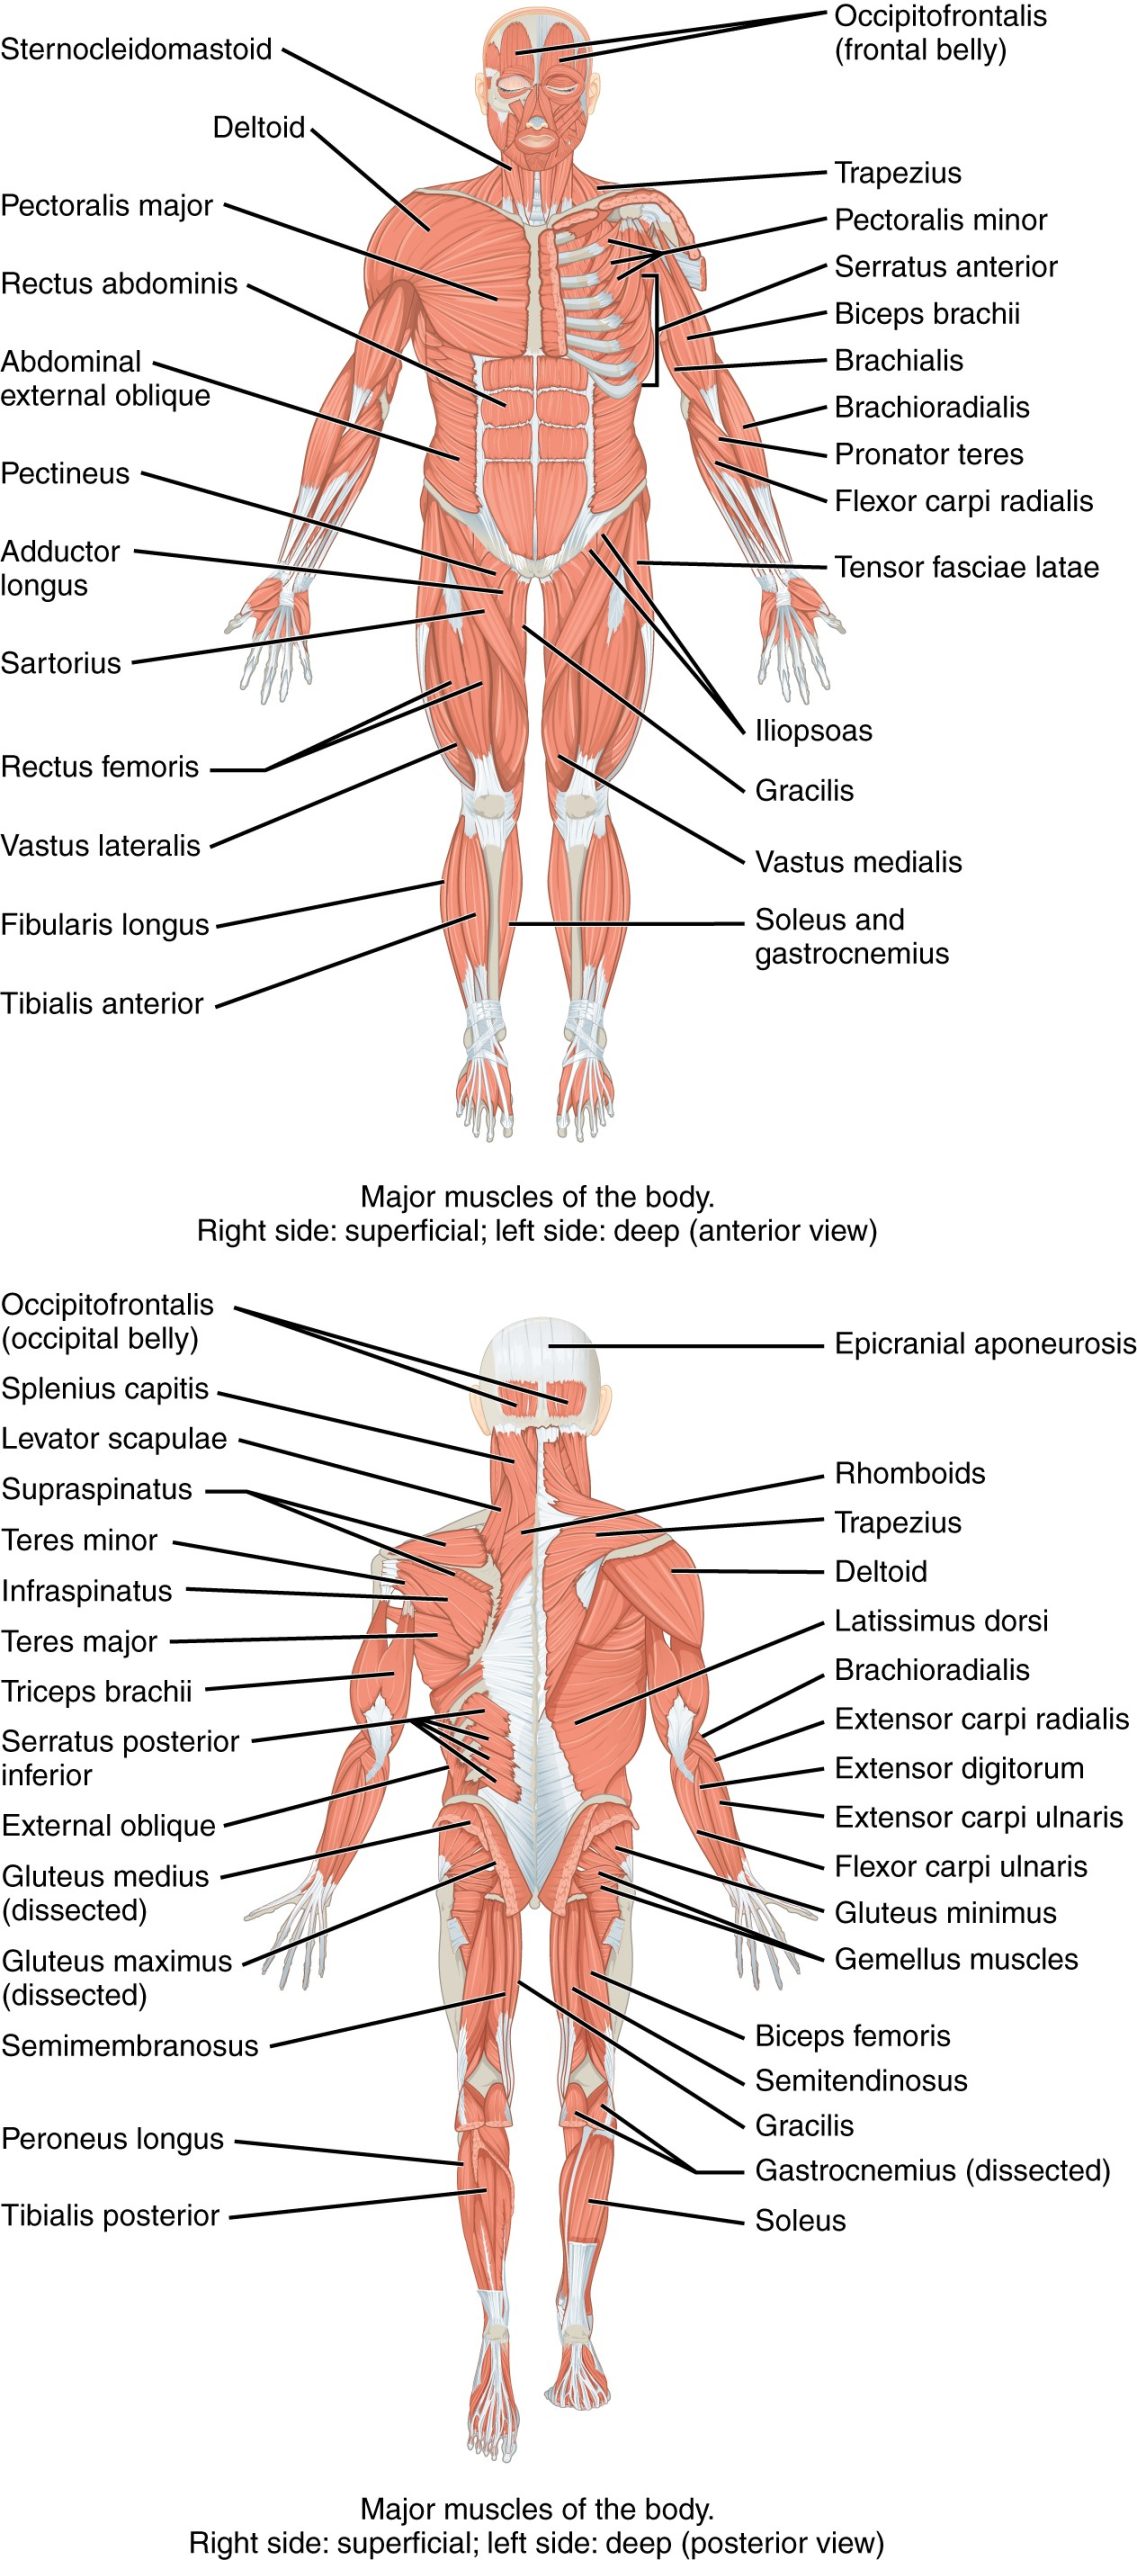 Illustration of the human muscular system with text labels for major structures